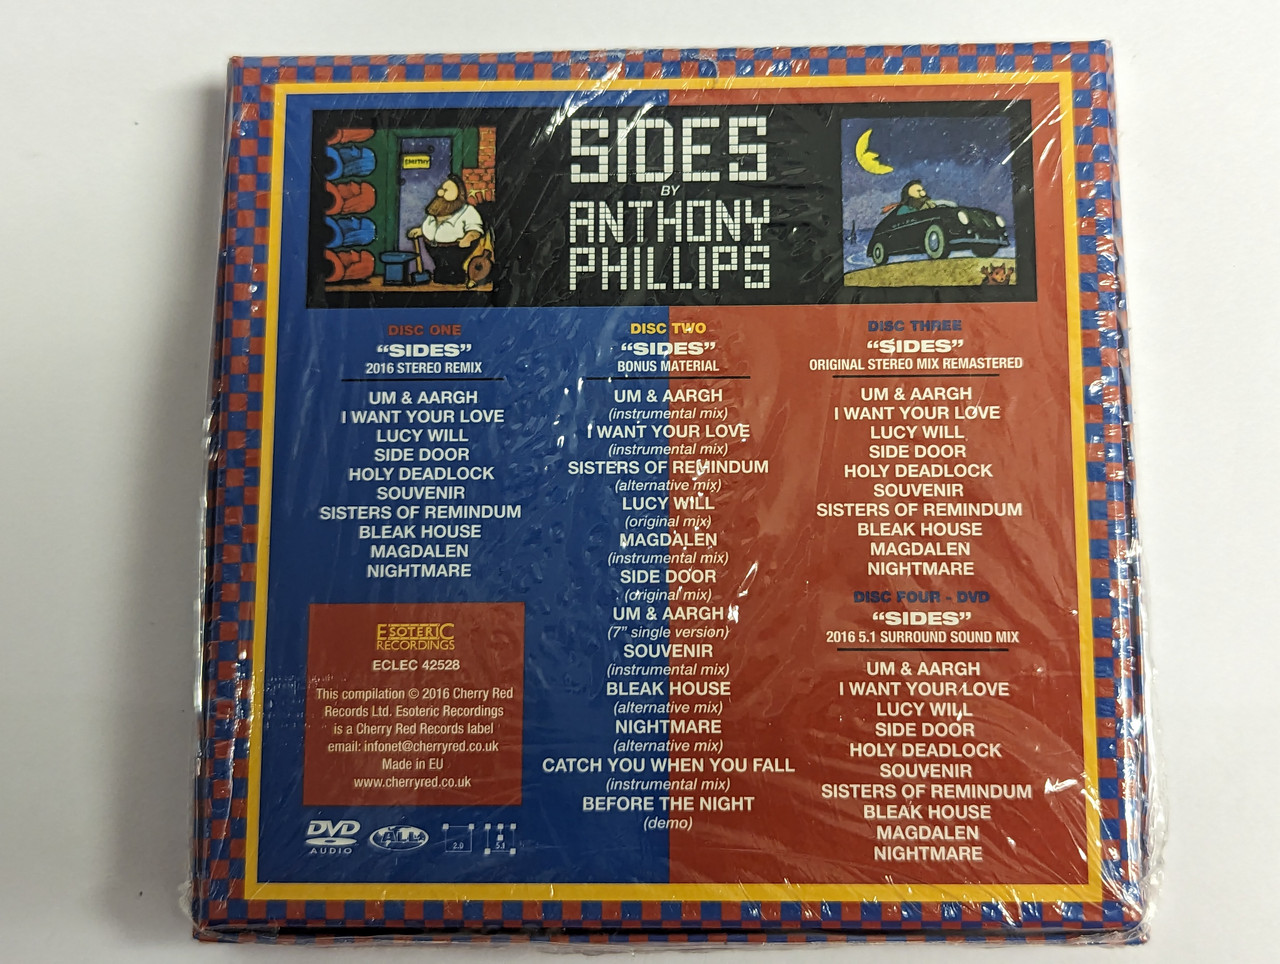 https://cdn10.bigcommerce.com/s-62bdpkt7pb/products/0/images/302579/Anthony_Phillips_Sides_4_Disc_Deluxe_Edition_The_classic_1979_album_by_Anthony_Philips_Featuring_new_stereo_5._1_mixes_of_the_album_a_remaster_of_the_original_stereo_mix_Esoteric___64519.1696510882.1280.1280.jpg?c=2&_gl=1*1201att*_ga*MjA2NTIxMjE2MC4xNTkwNTEyNTMy*_ga_WS2VZYPC6G*MTY5NjUxMDI4Ny4xMDg5LjEuMTY5NjUxMDU2OC41MS4wLjA.